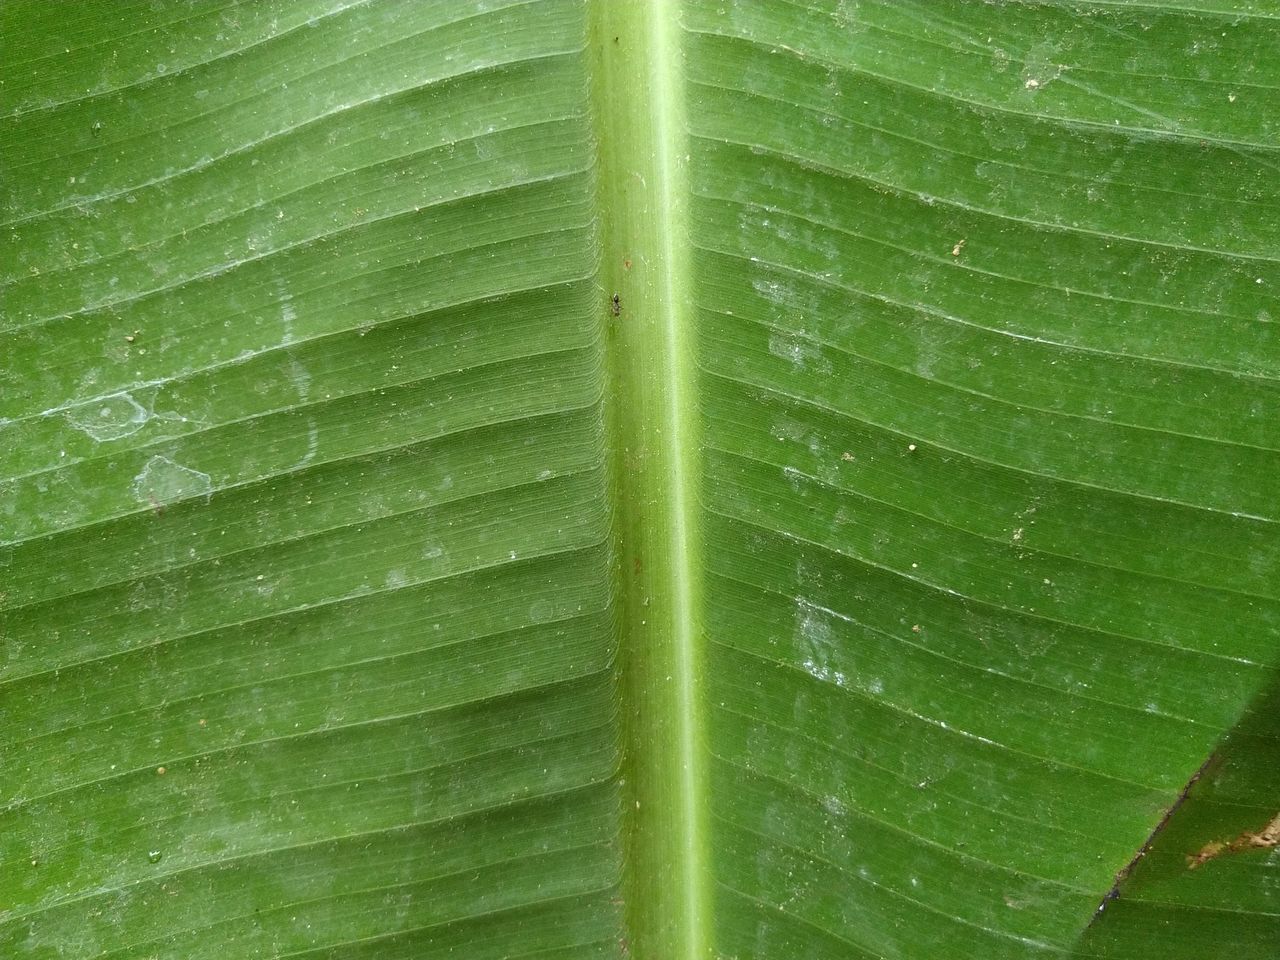 leaf, green, plant part, plant, close-up, leaf vein, backgrounds, no people, banana leaf, full frame, nature, pattern, growth, beauty in nature, flower, plant stem, textured, freshness, outdoors, day, tree, leaves, macro, botany